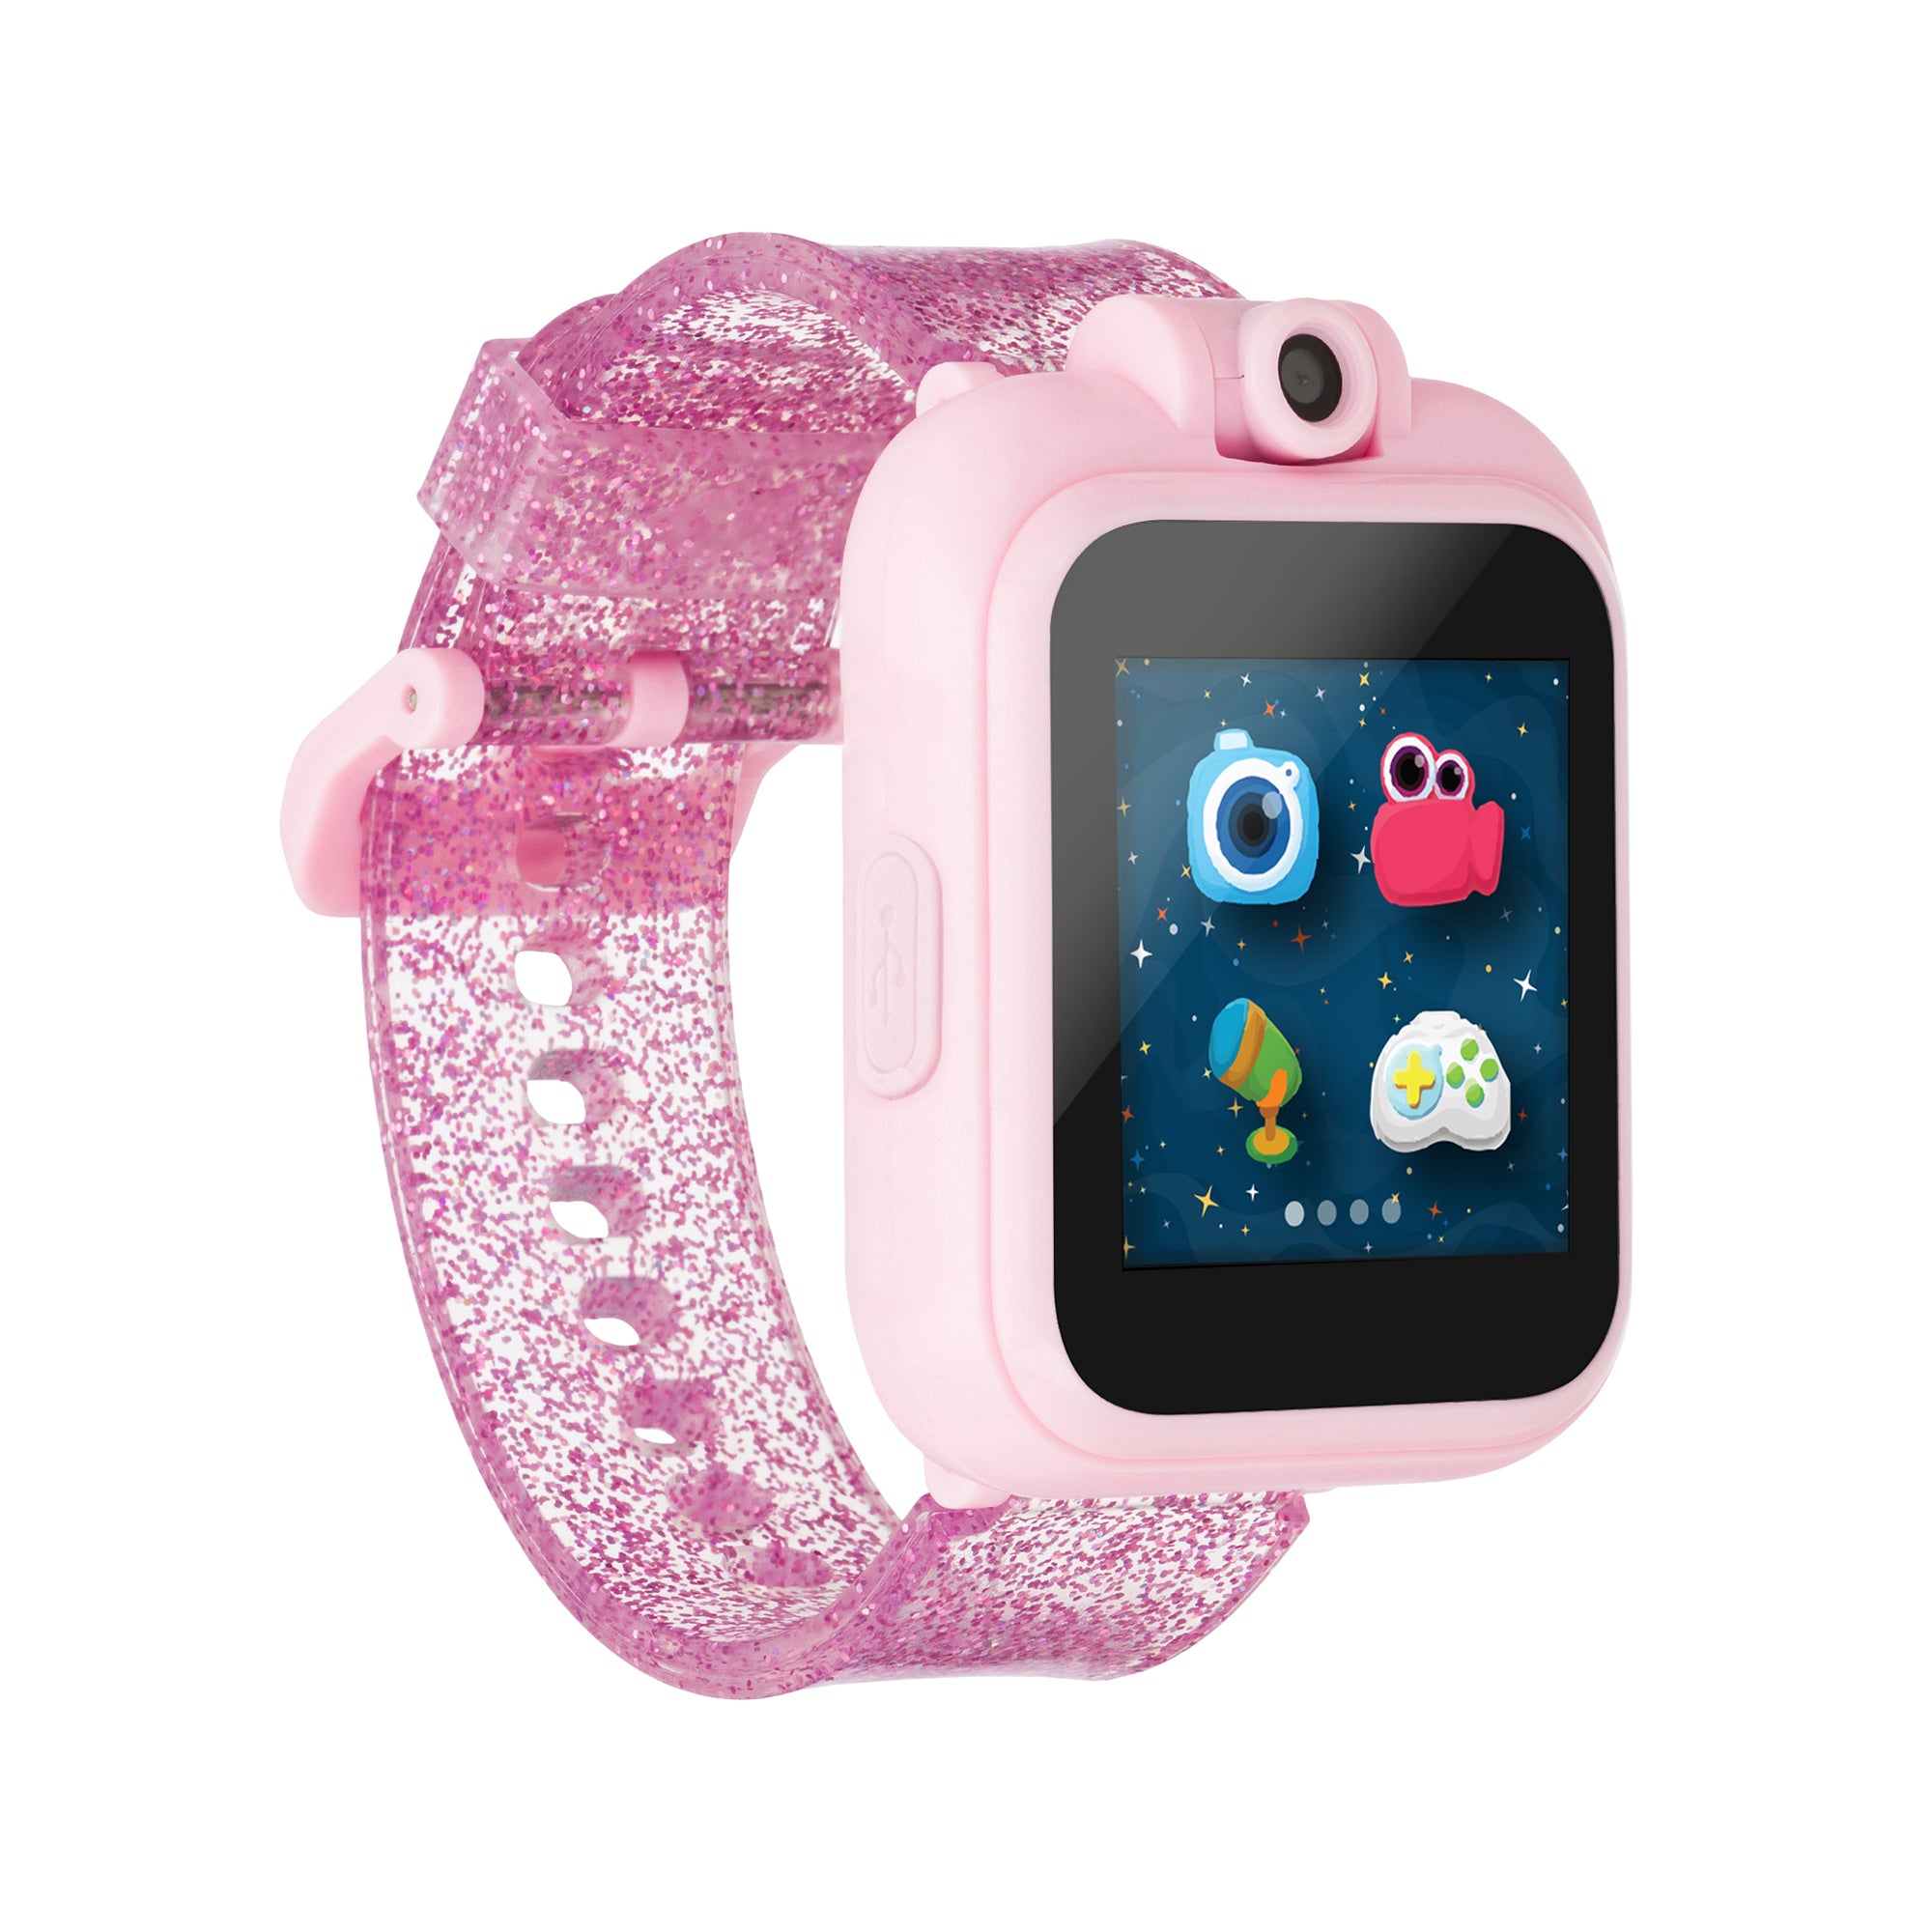 PlayZoom Smartwatch for Kids: Pink Glitter affordable smart watch